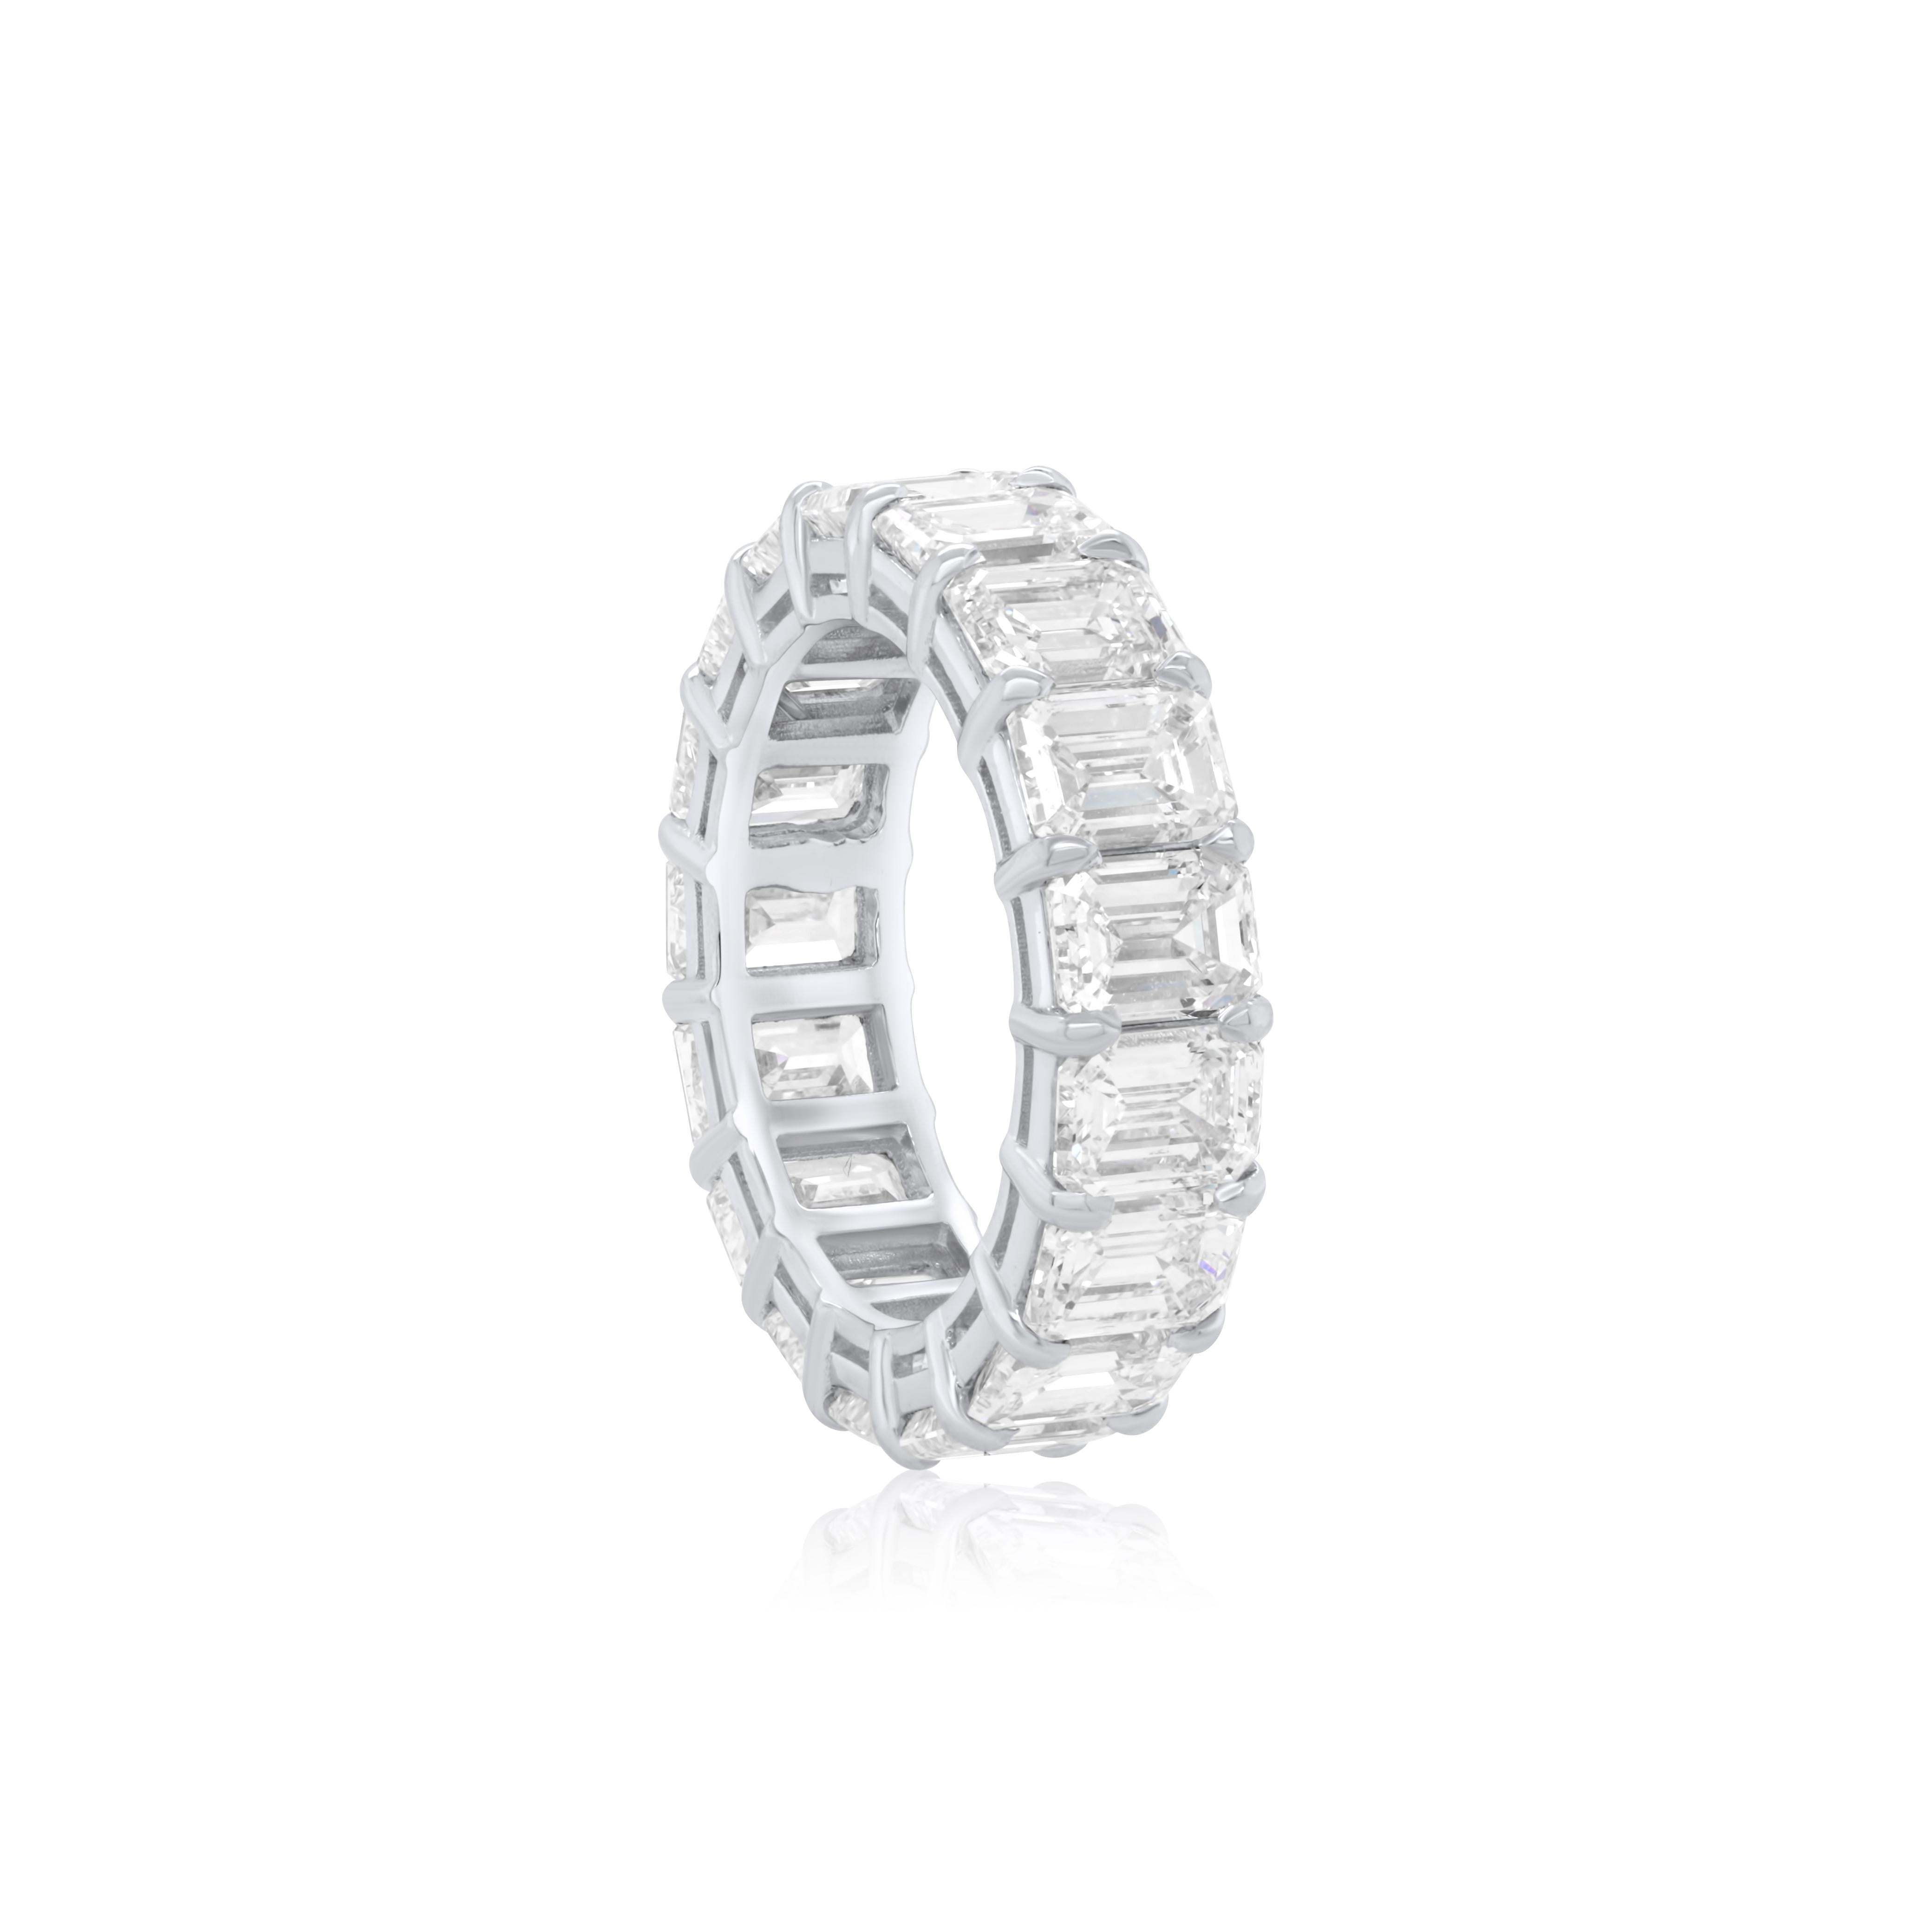 PLATINUM ETERNITY BAND WITH 18 EMERALD CUT DIAMONDS  RING, WIEGHING 9.16CTS E-F COLOR VVS-VS CLARITY, SIZE 5.75
Diana M. is a leading supplier of top-quality fine jewelry for over 35 years.
Diana M is one-stop shop for all your jewelry shopping,